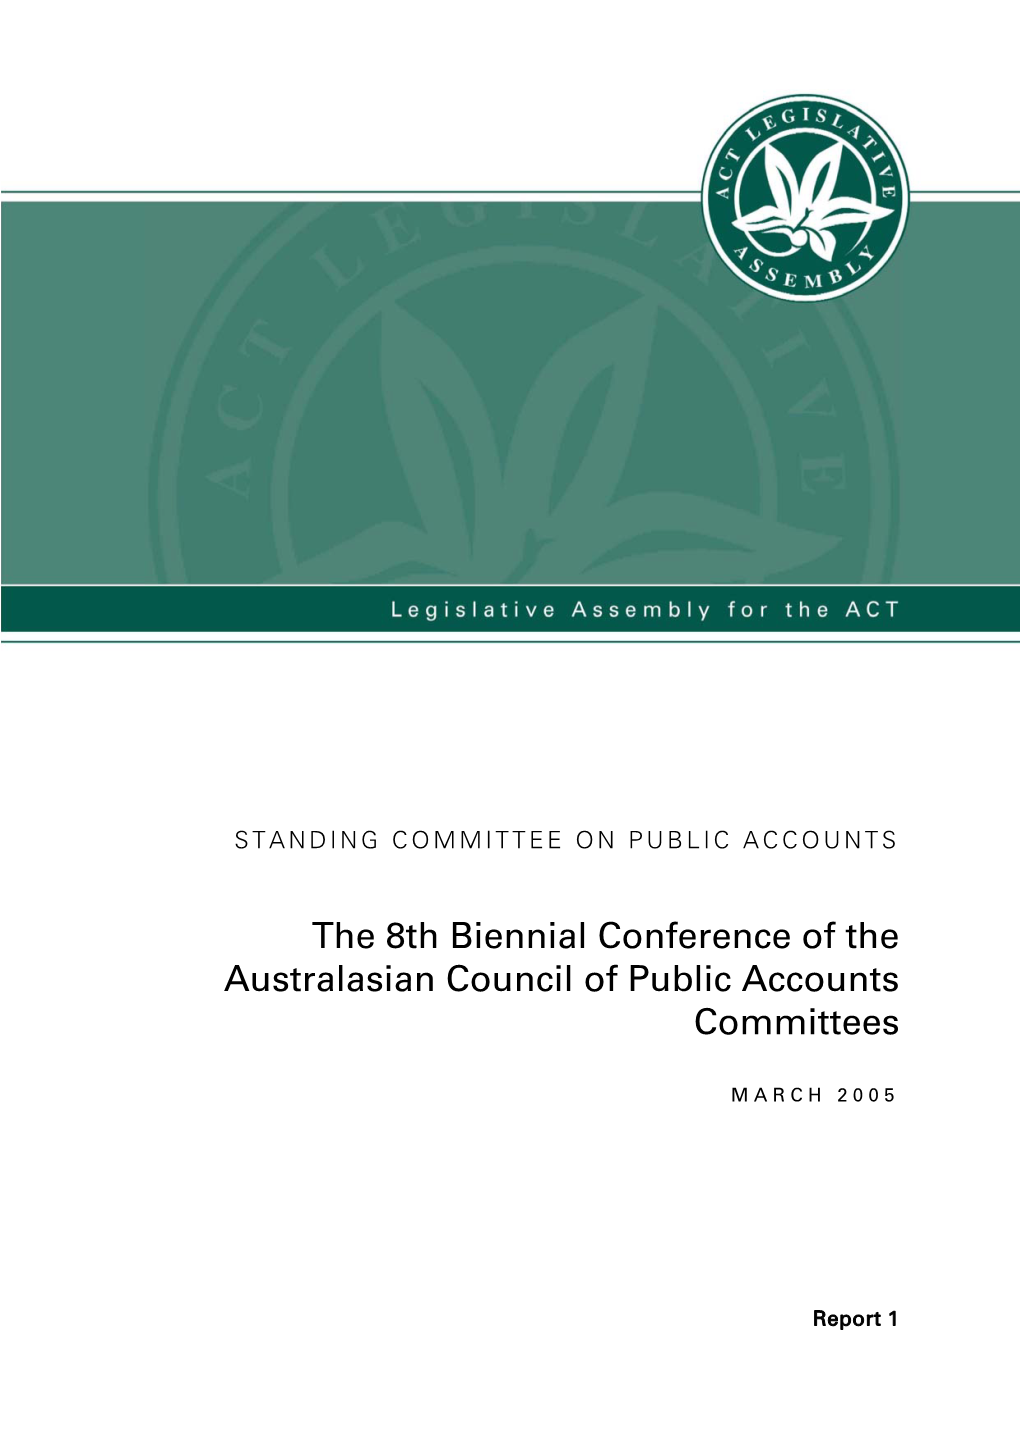 The 8Th Biennial Conference of the Australasian Council of Public Accounts Committees